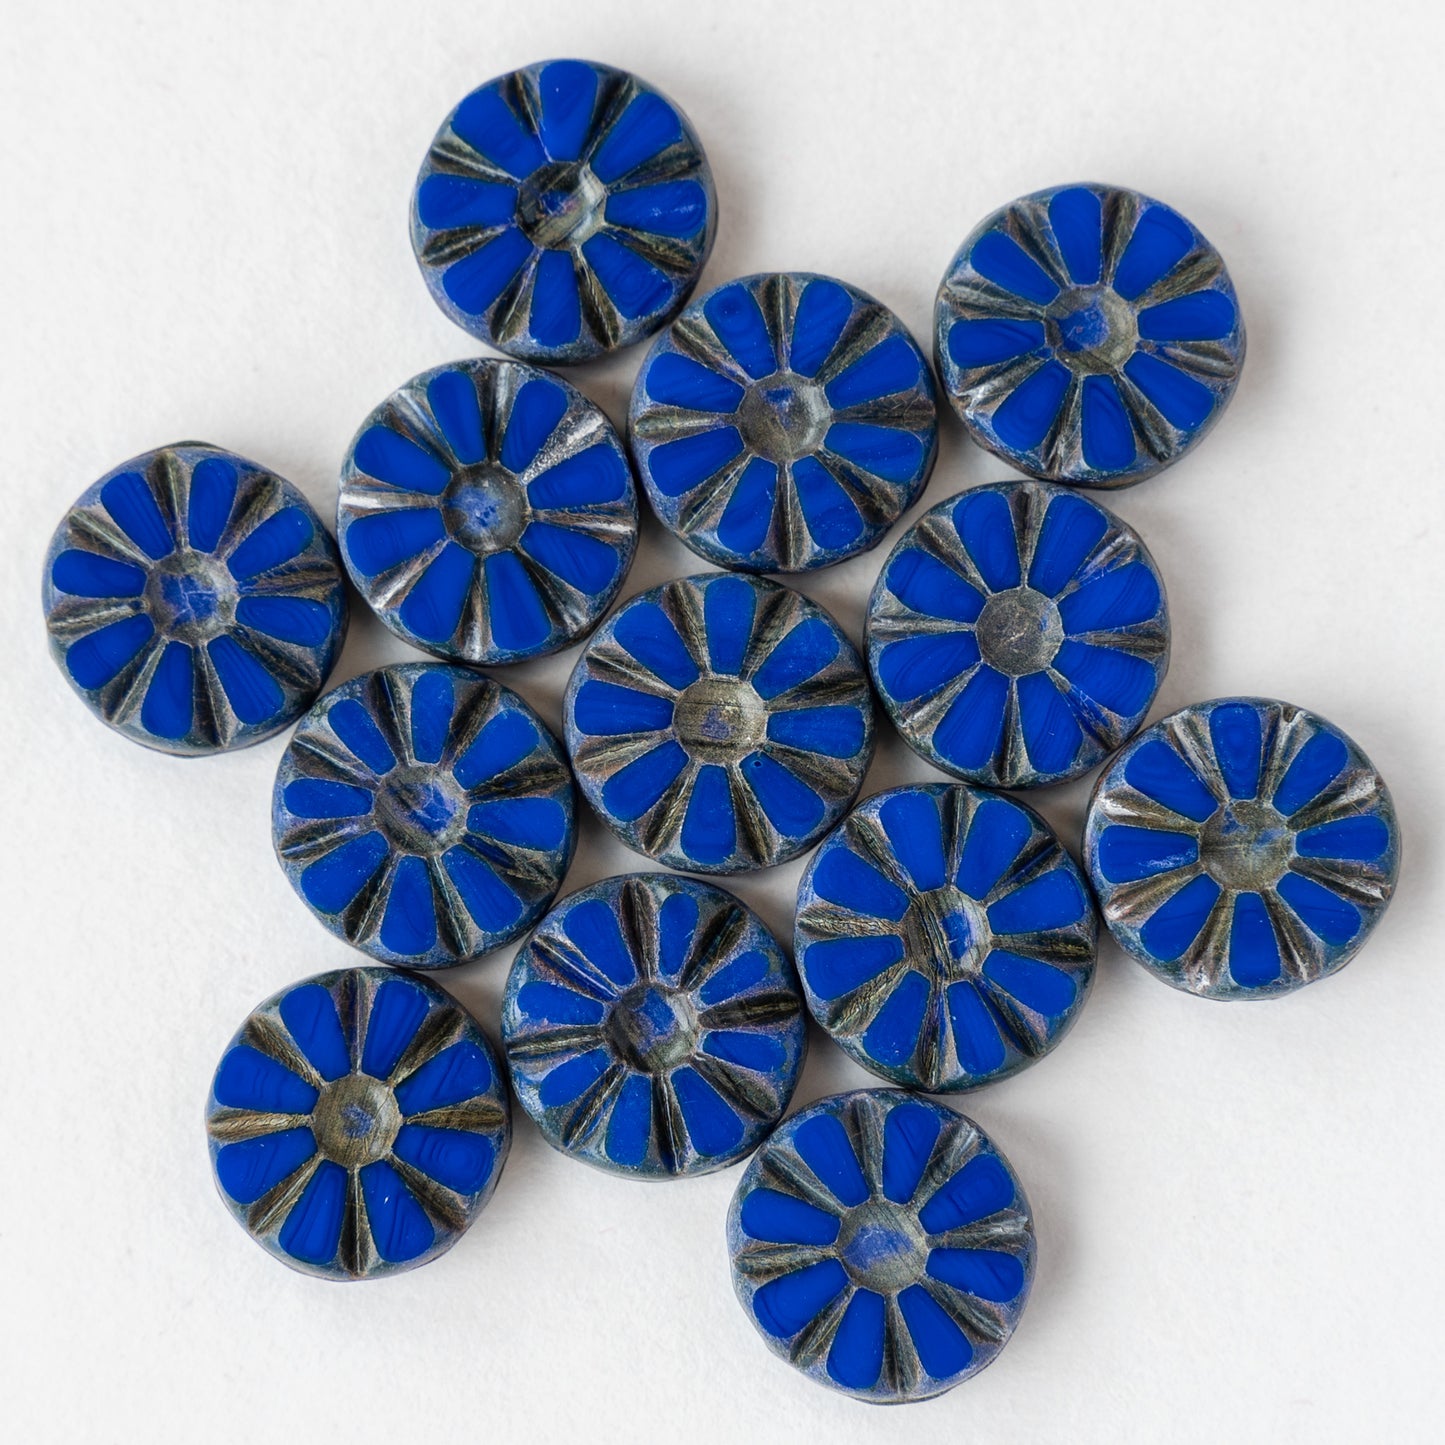 12mm Sunflower Coin Beads - Blue - 10 or 30 Beads